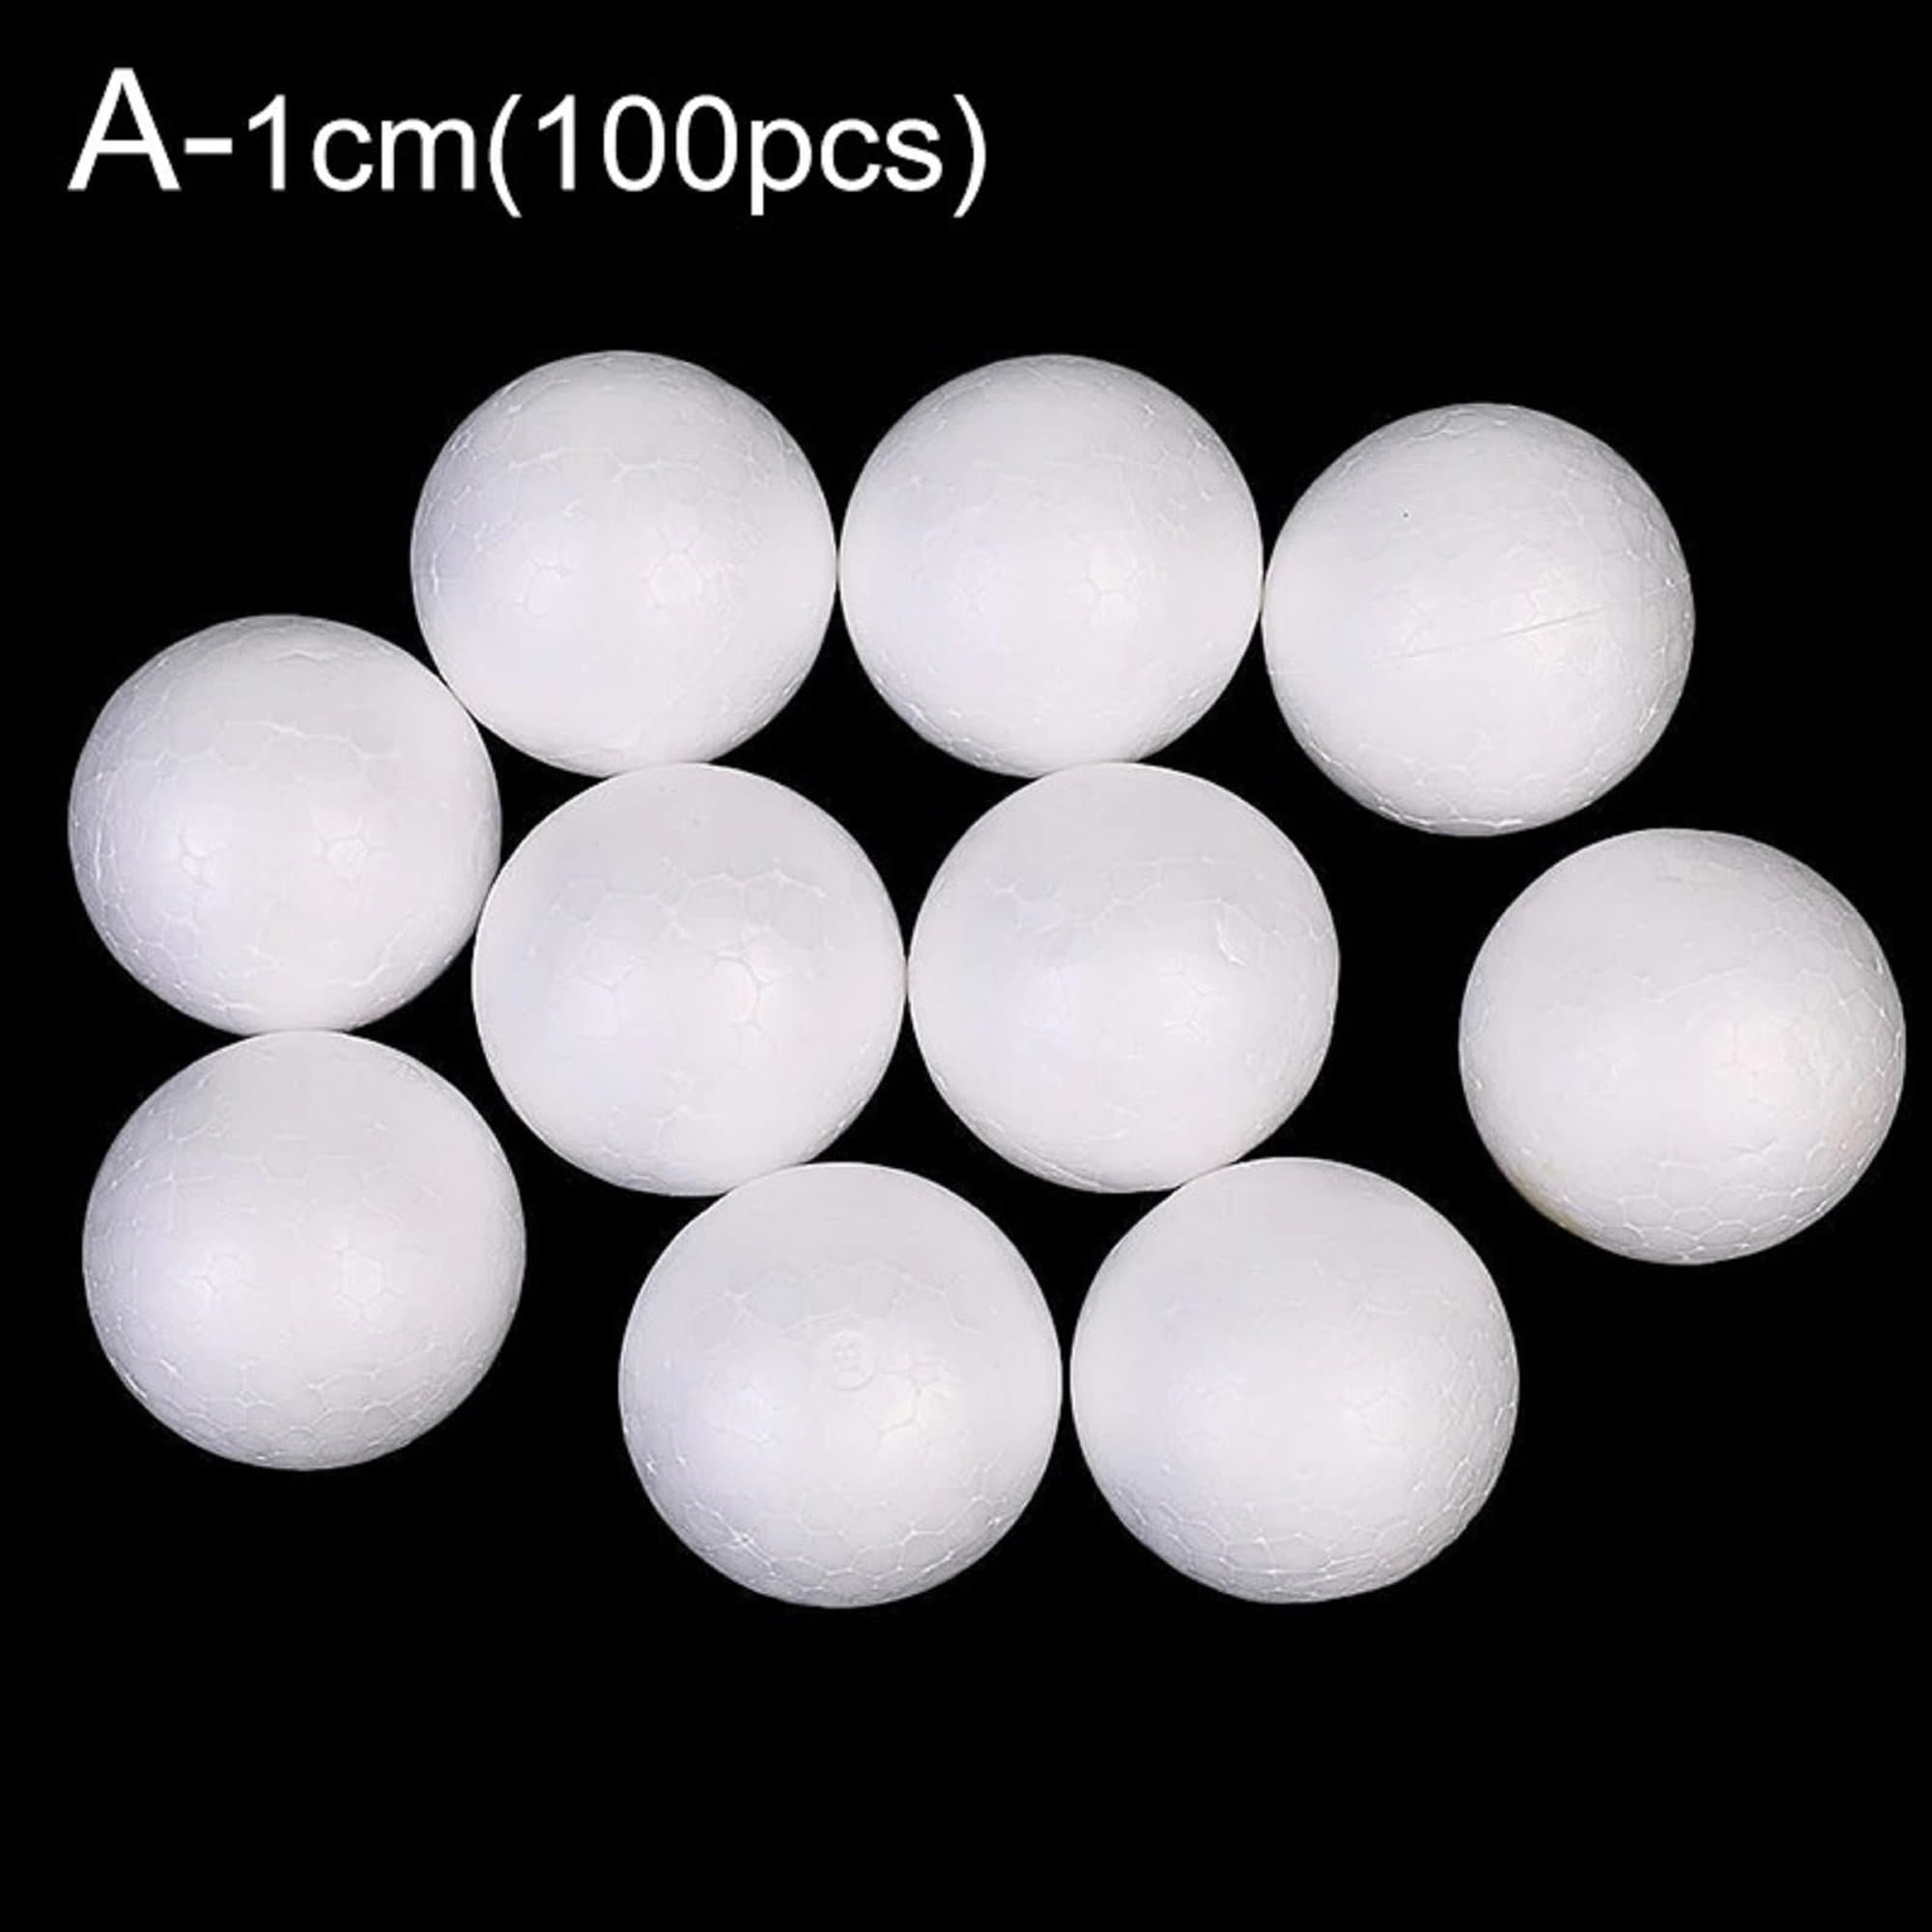 3 Inch Smooth Foam Balls for Spring Holiday, Class Crafts Making